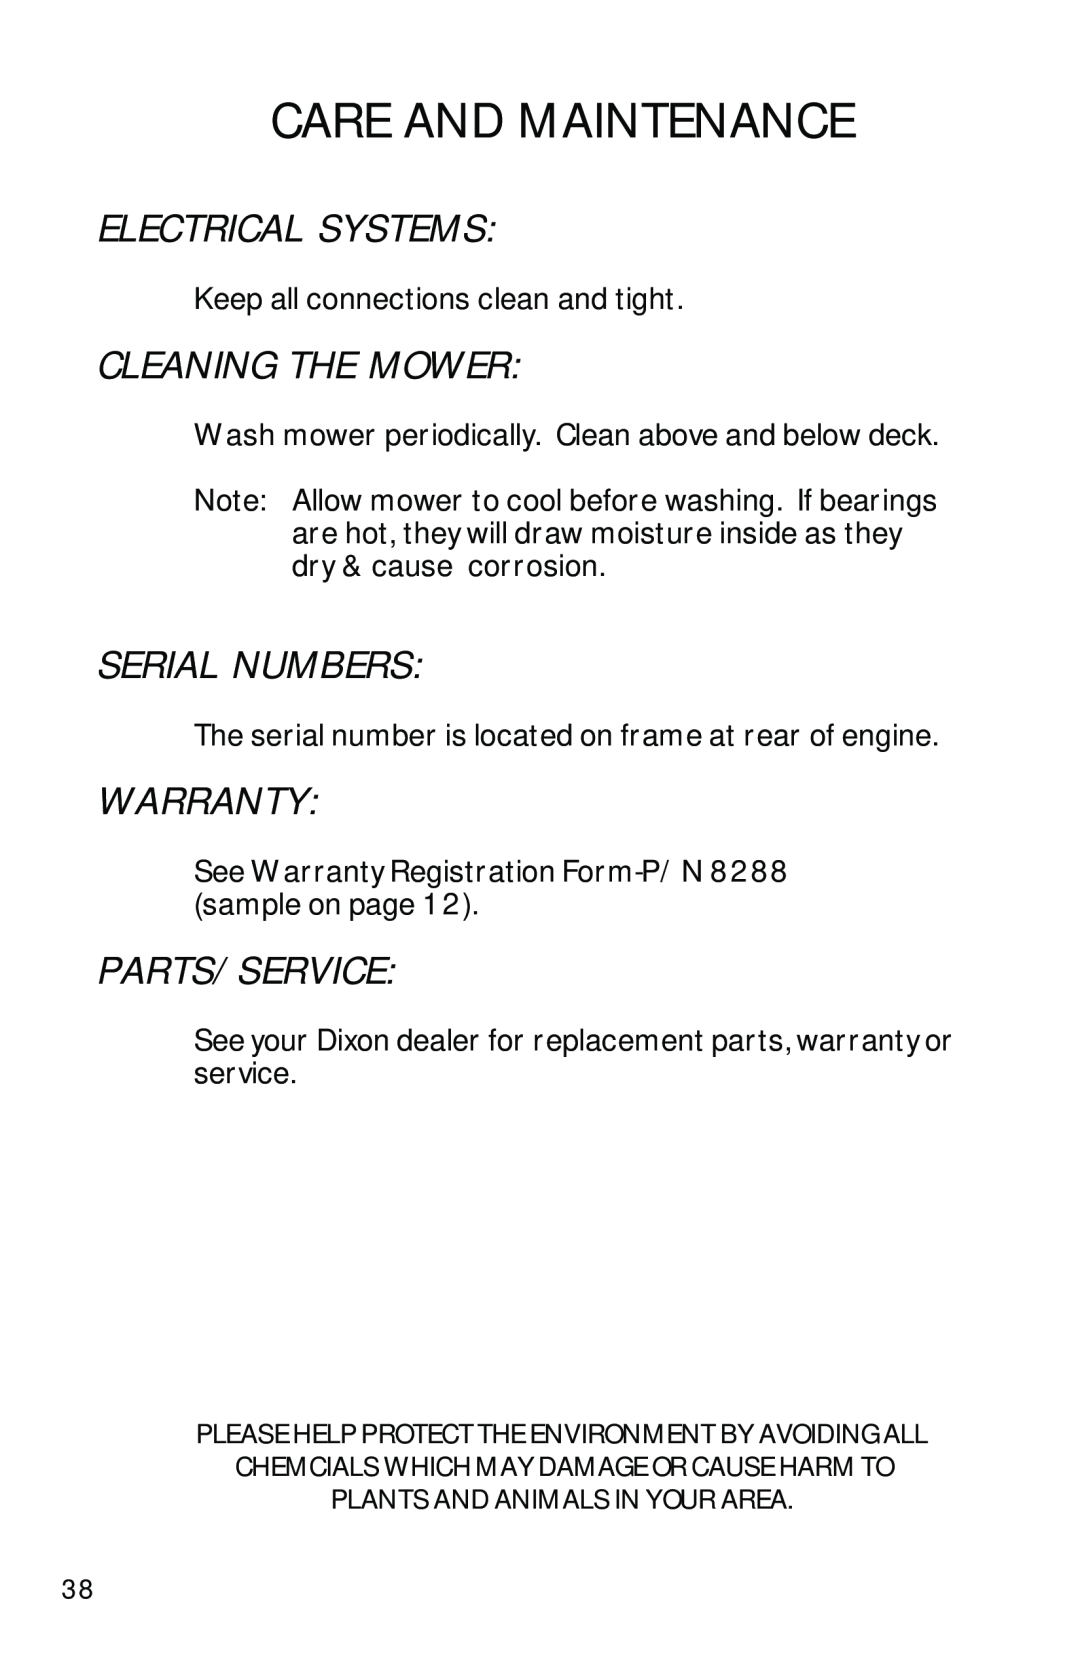 Dixon ZTR 2002 manual Electrical Systems, Cleaning The Mower, Serial Numbers, Warranty, Parts/Service, Care And Maintenance 